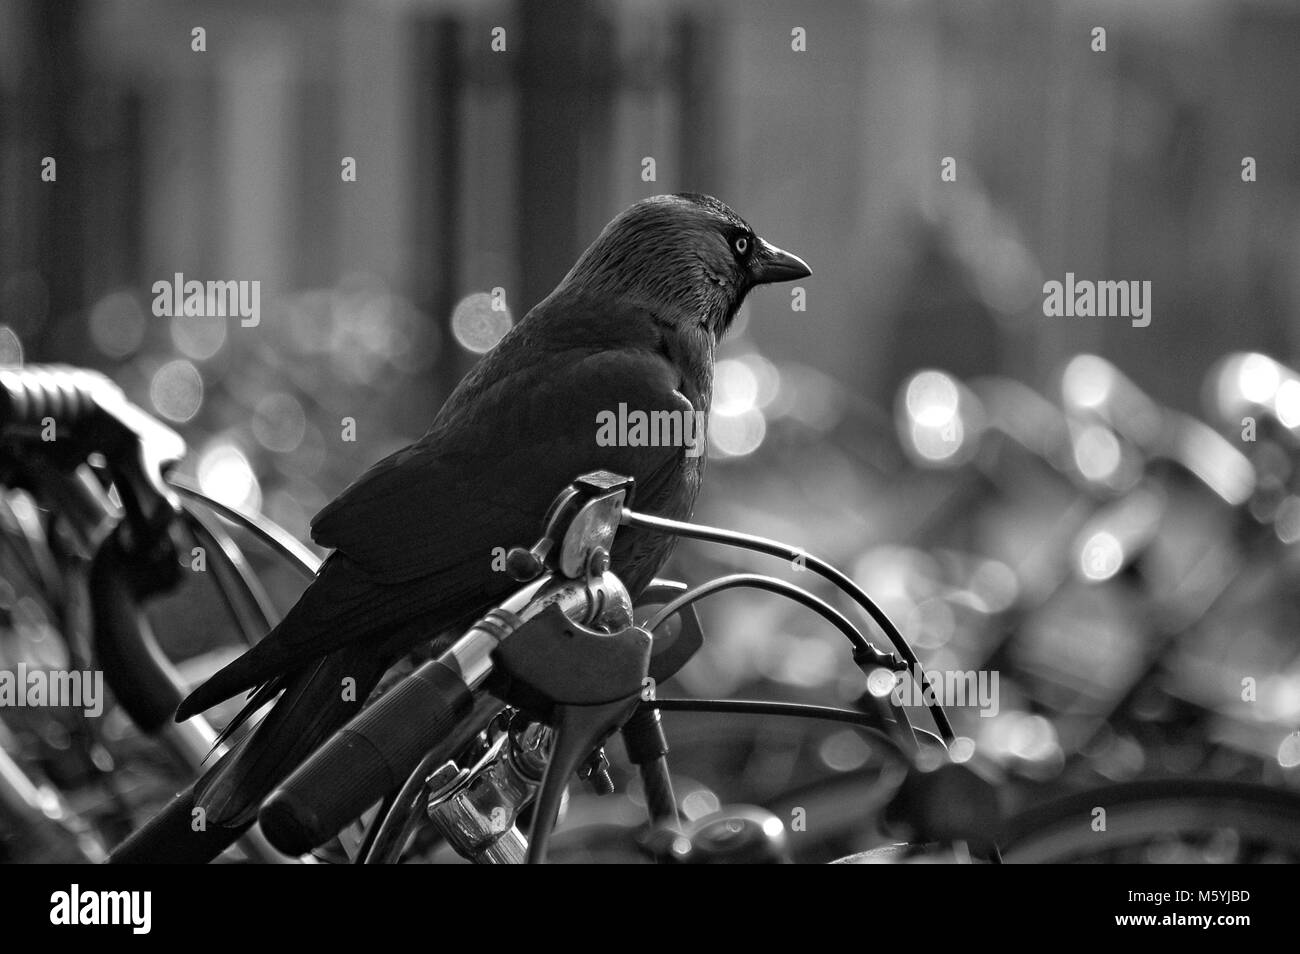 a crow on top of the handlebar of a bicycle Stock Photo